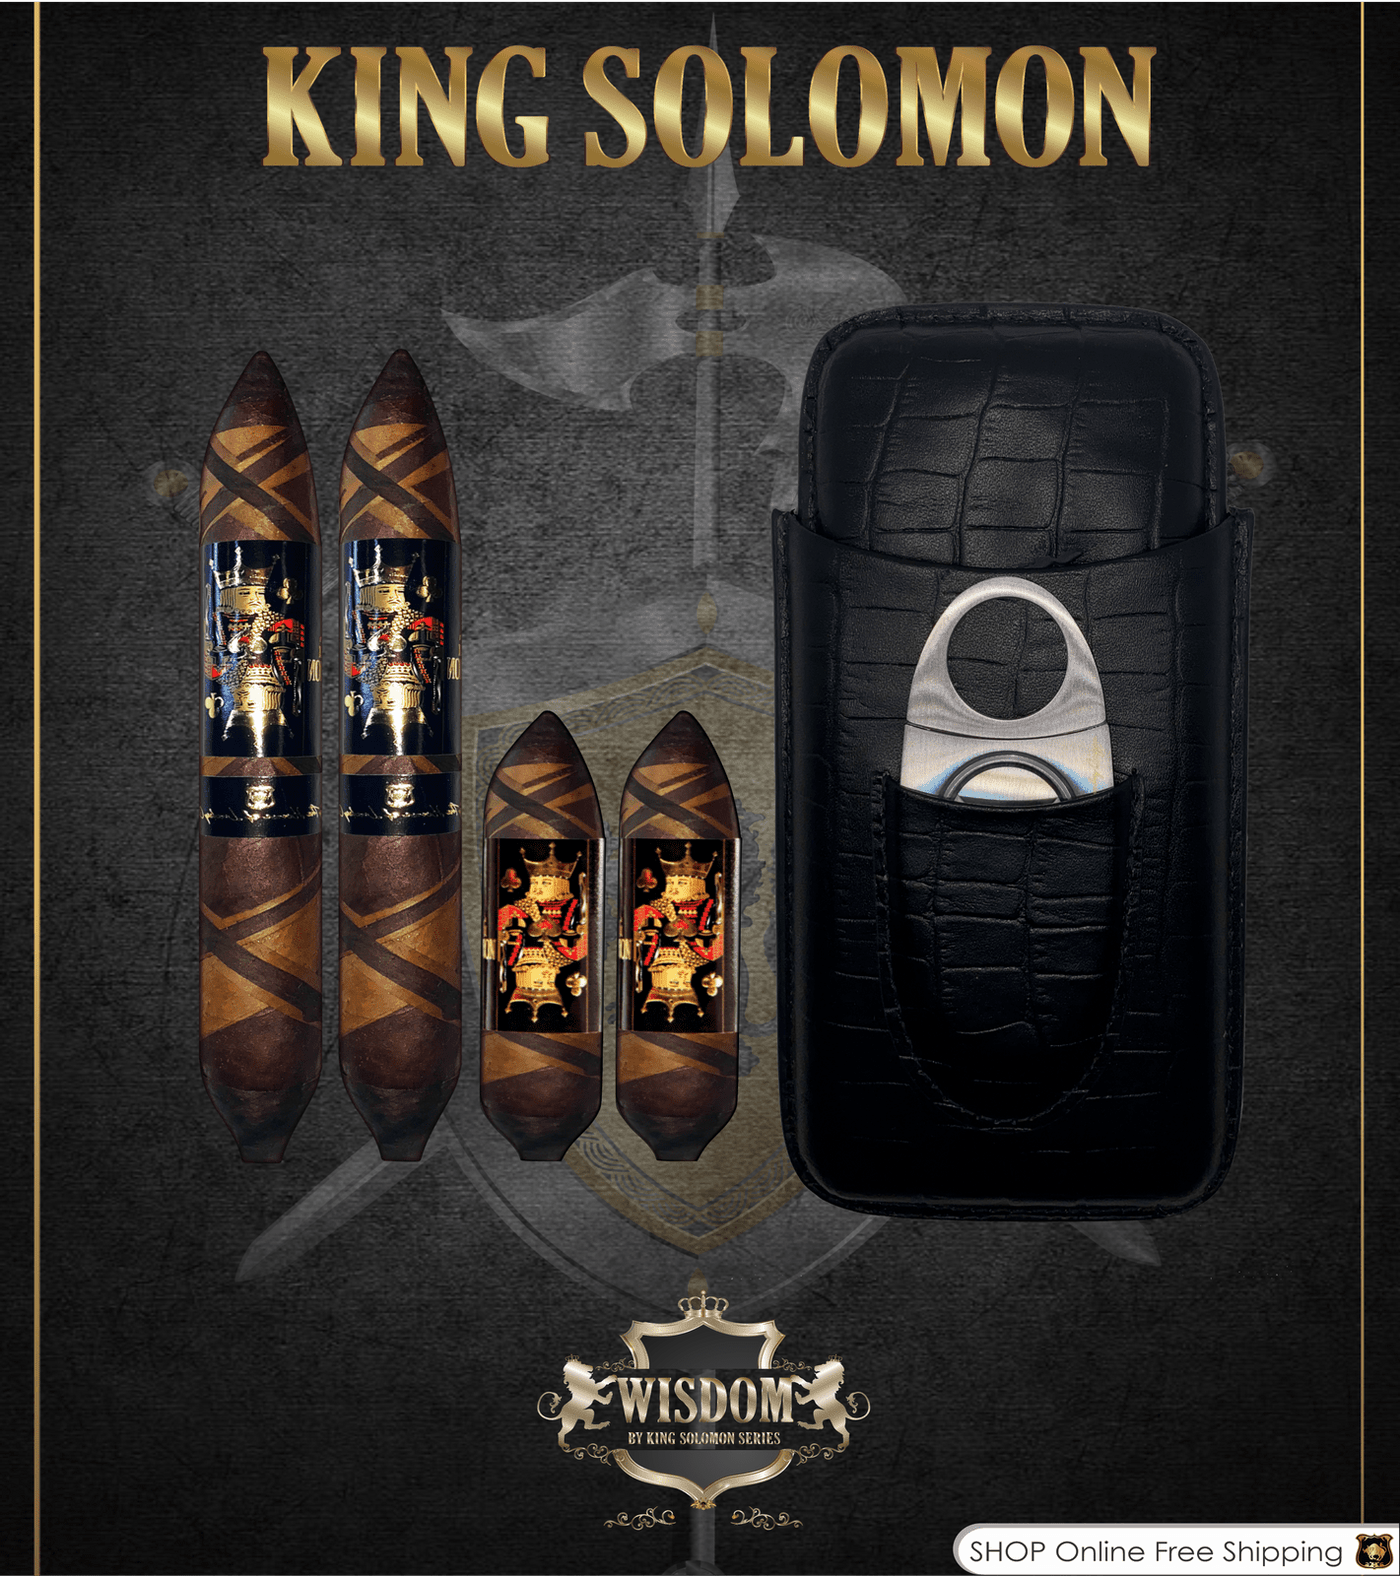 Wisdom 4x60 Cigar From The King Solomon Series: Set of 2 and 2 King Solomon 7x58 Cigar with Humidor, Cutter